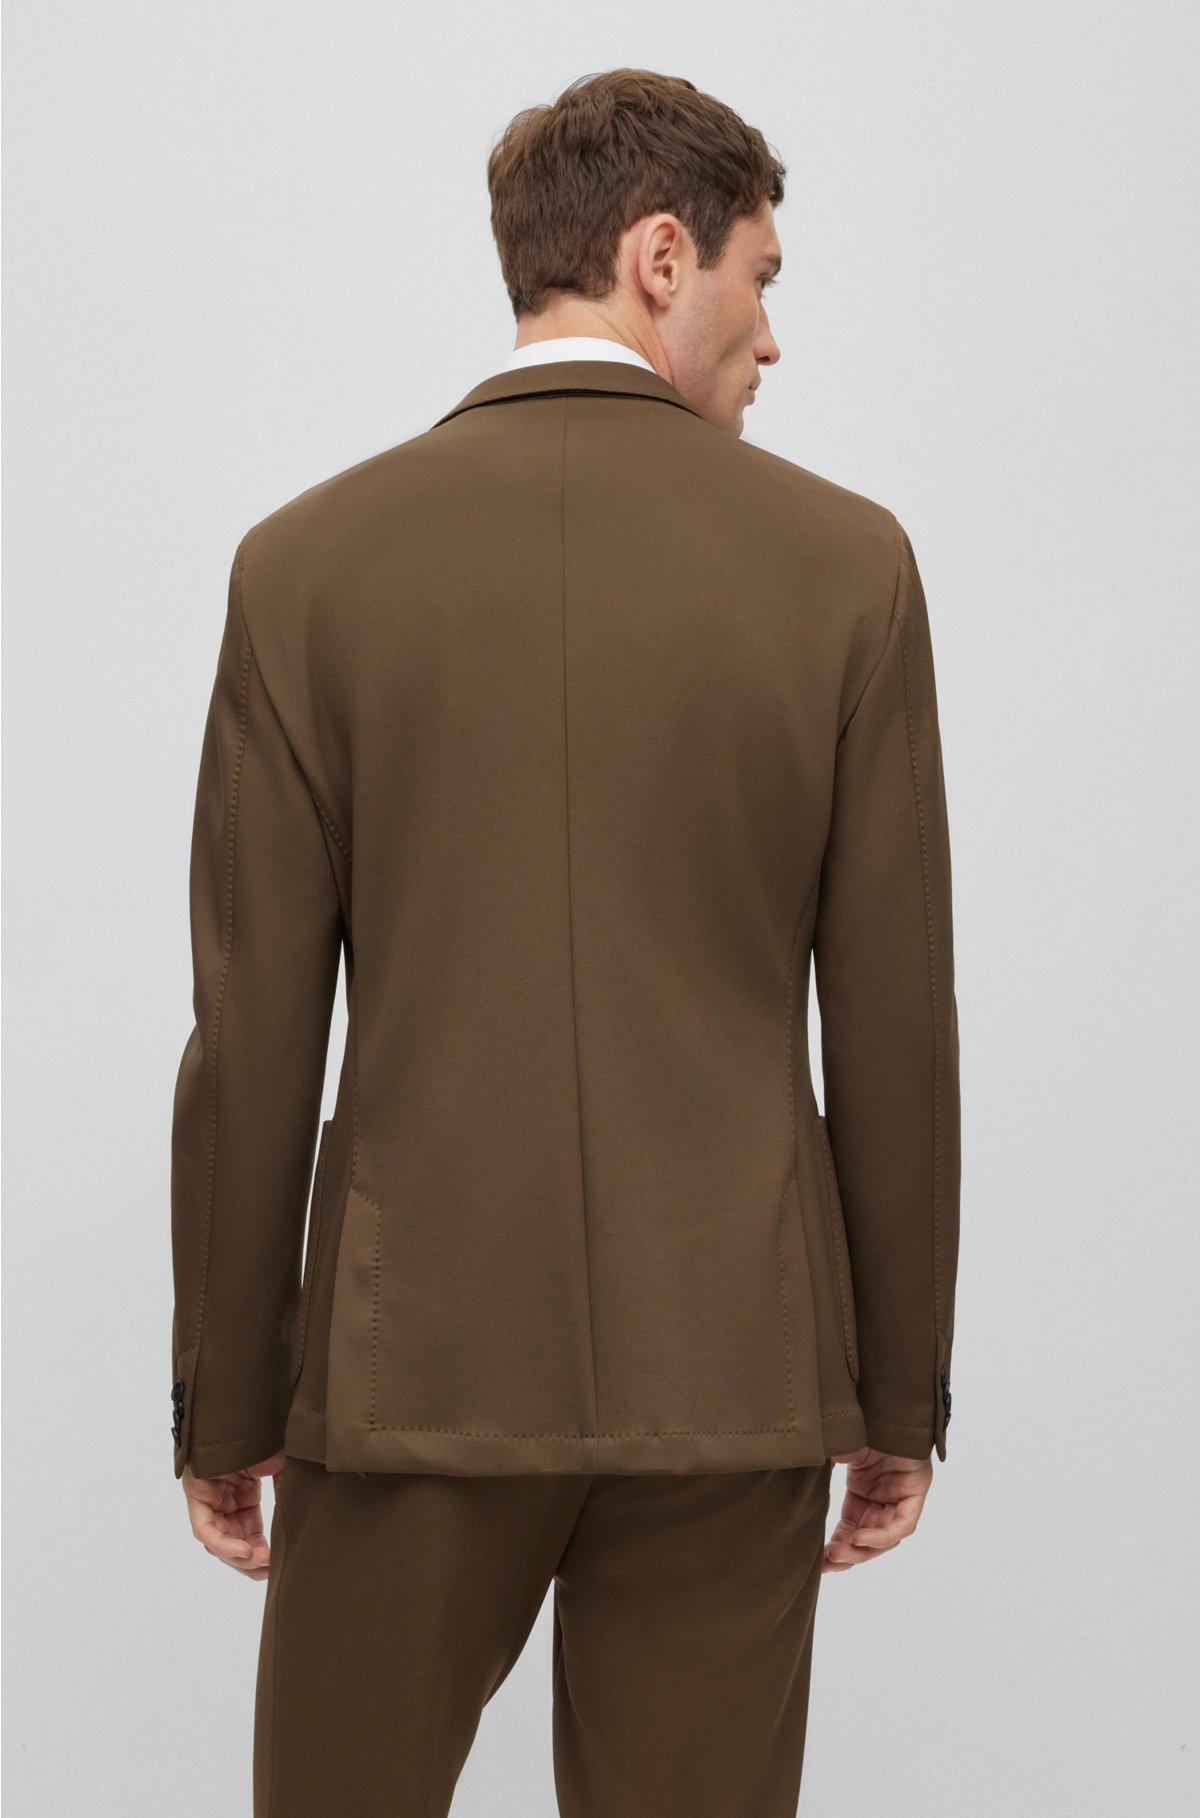 BOSS - Slim-fit jacket in micro-patterned performance-stretch fabric